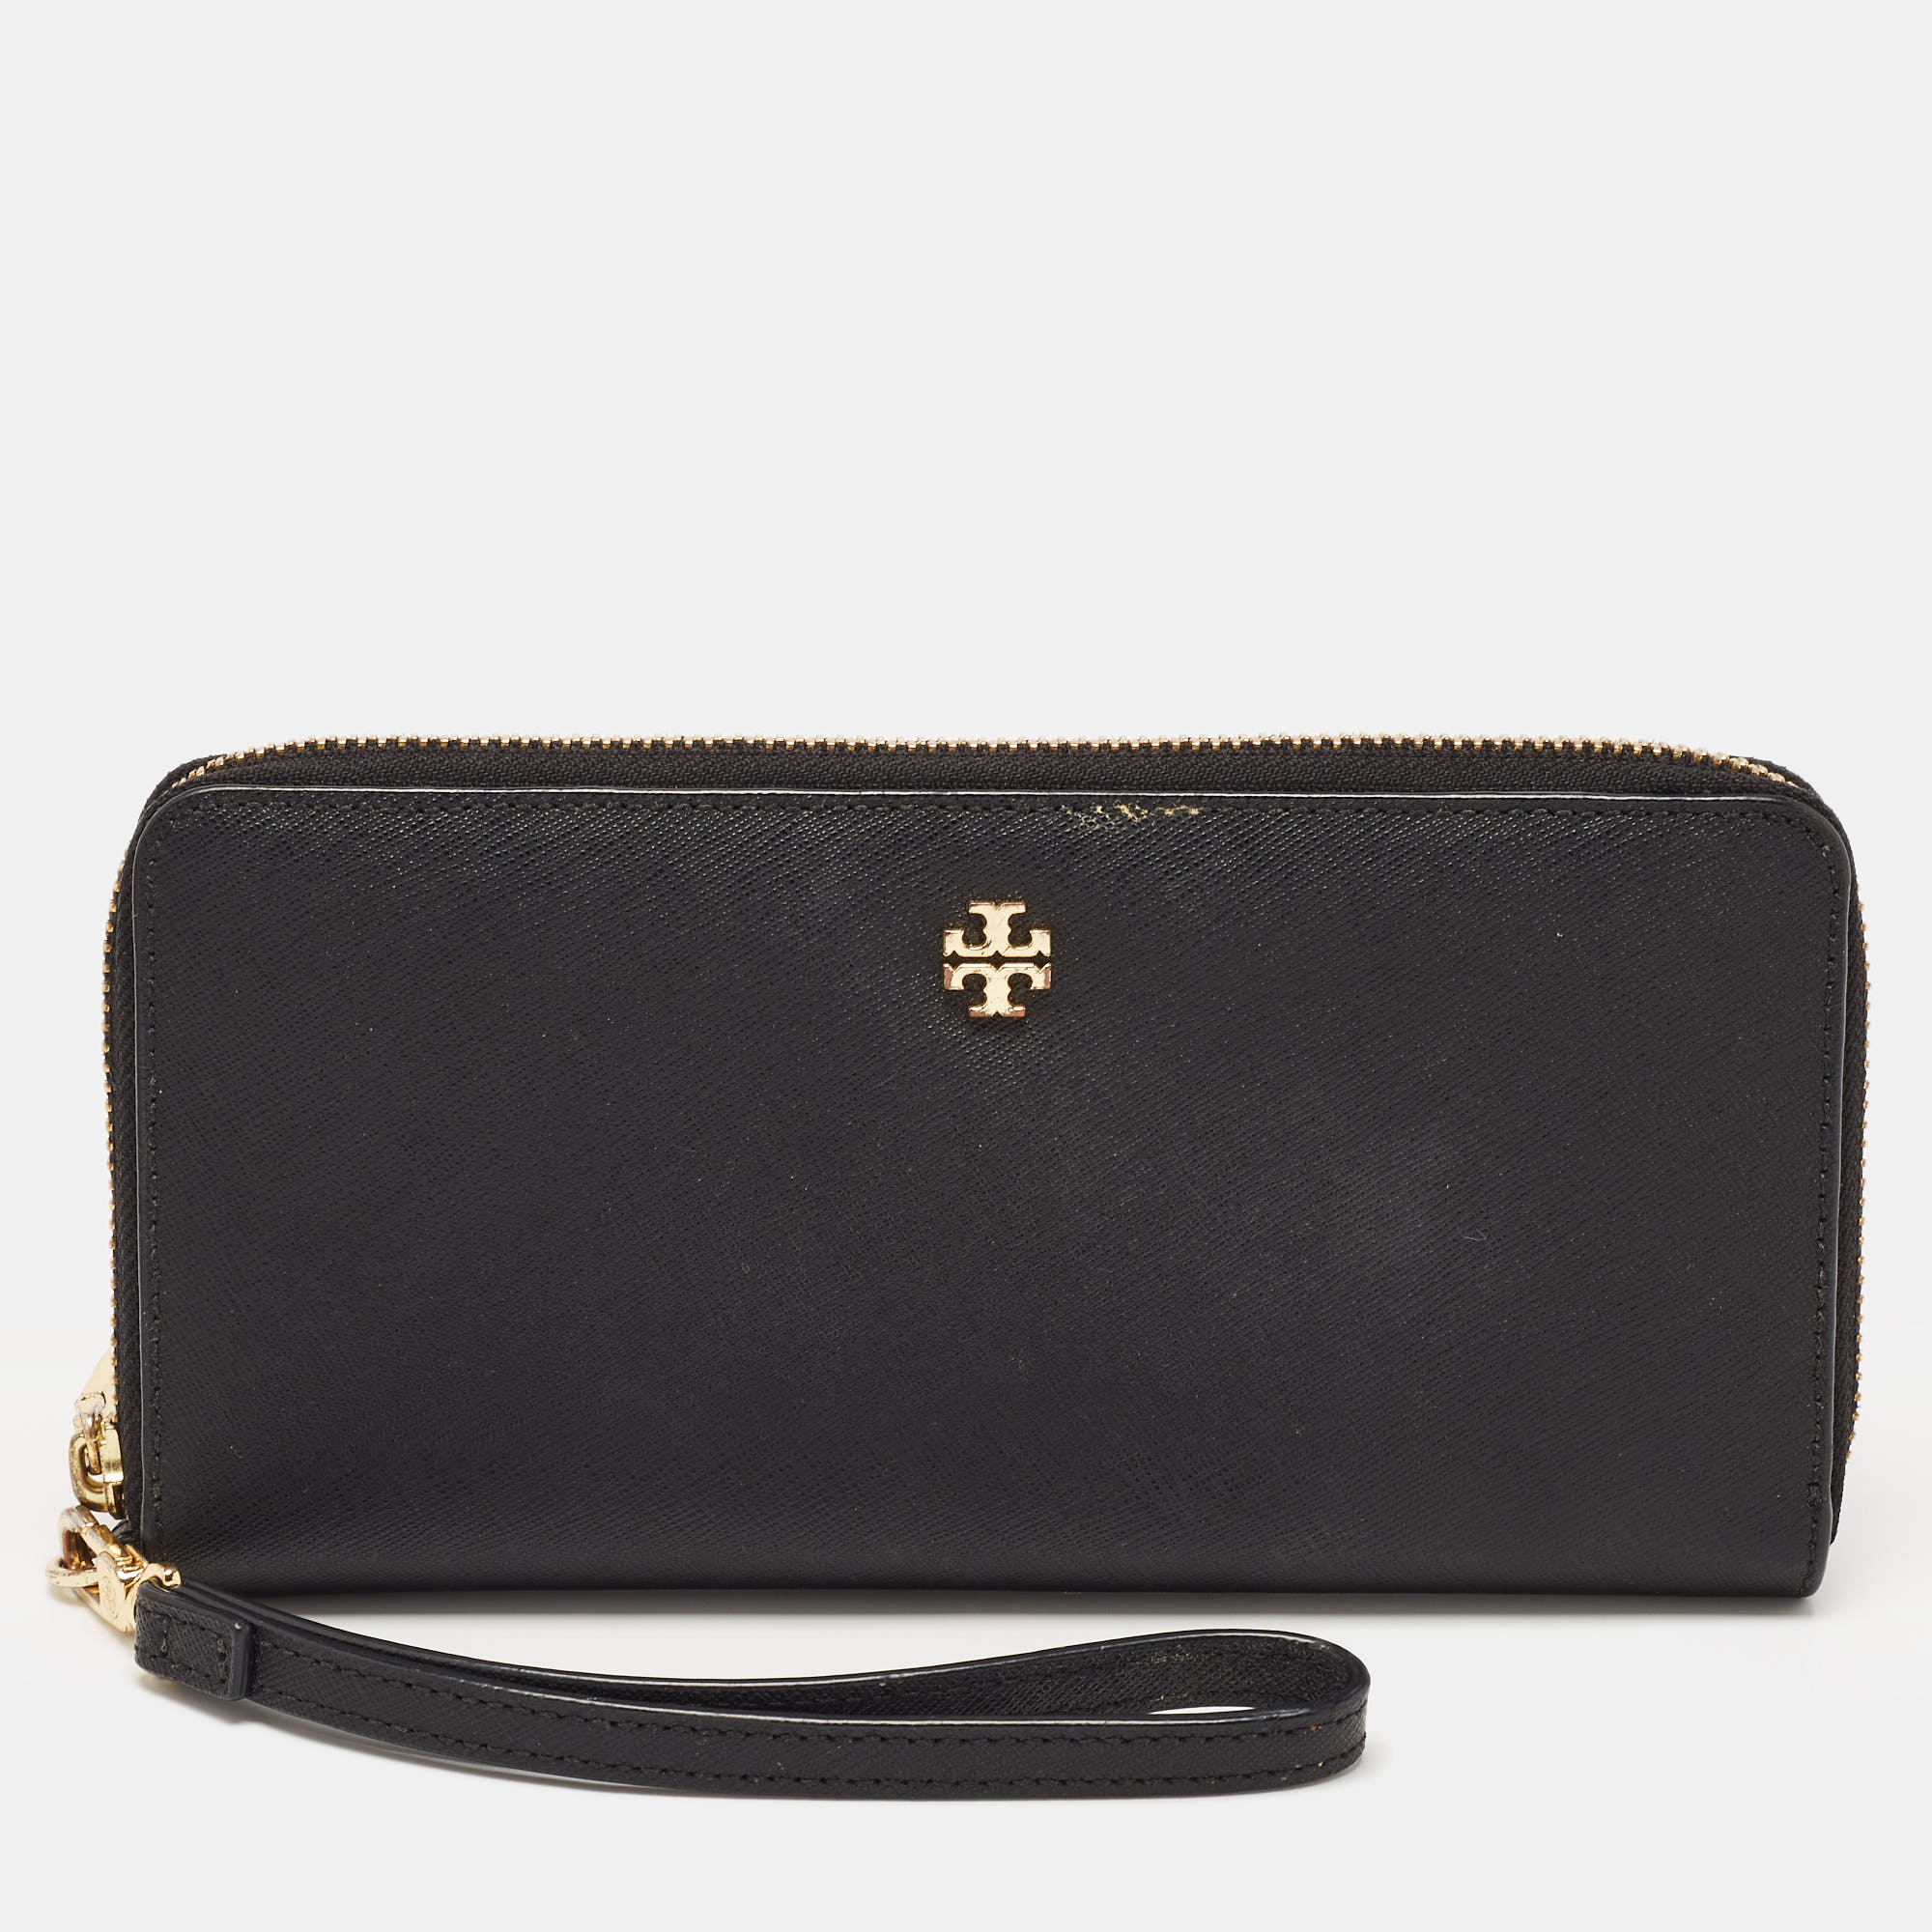 Pre-owned Tory Burch Black Leather Robinson Zip Around Wristlet Wallet